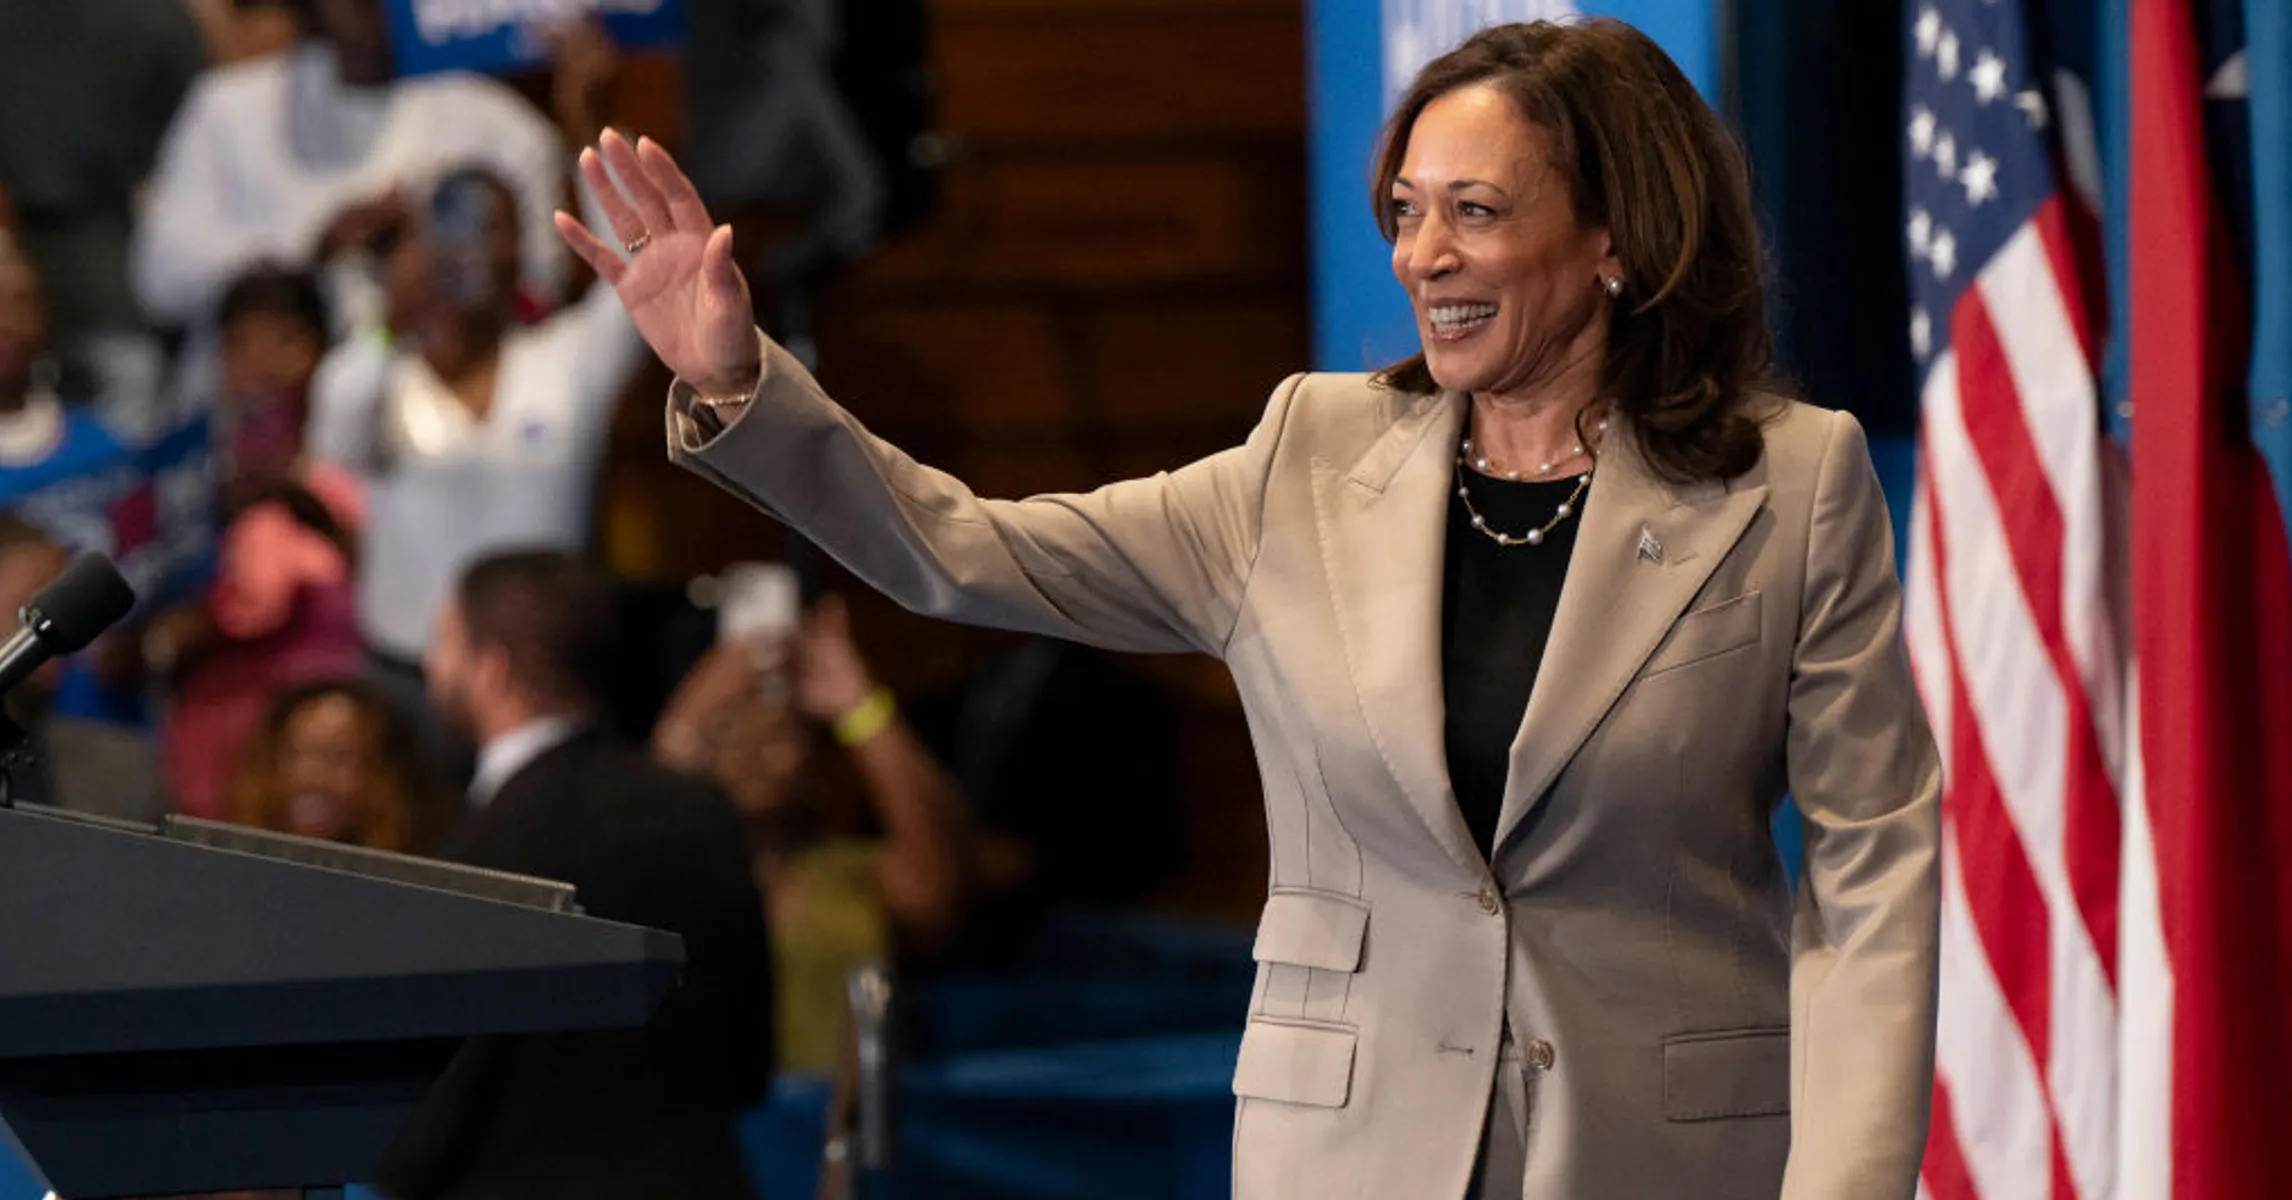 Kamala Harris leaves the house to a Beyoncé song after Tina Knowles supports her engagement